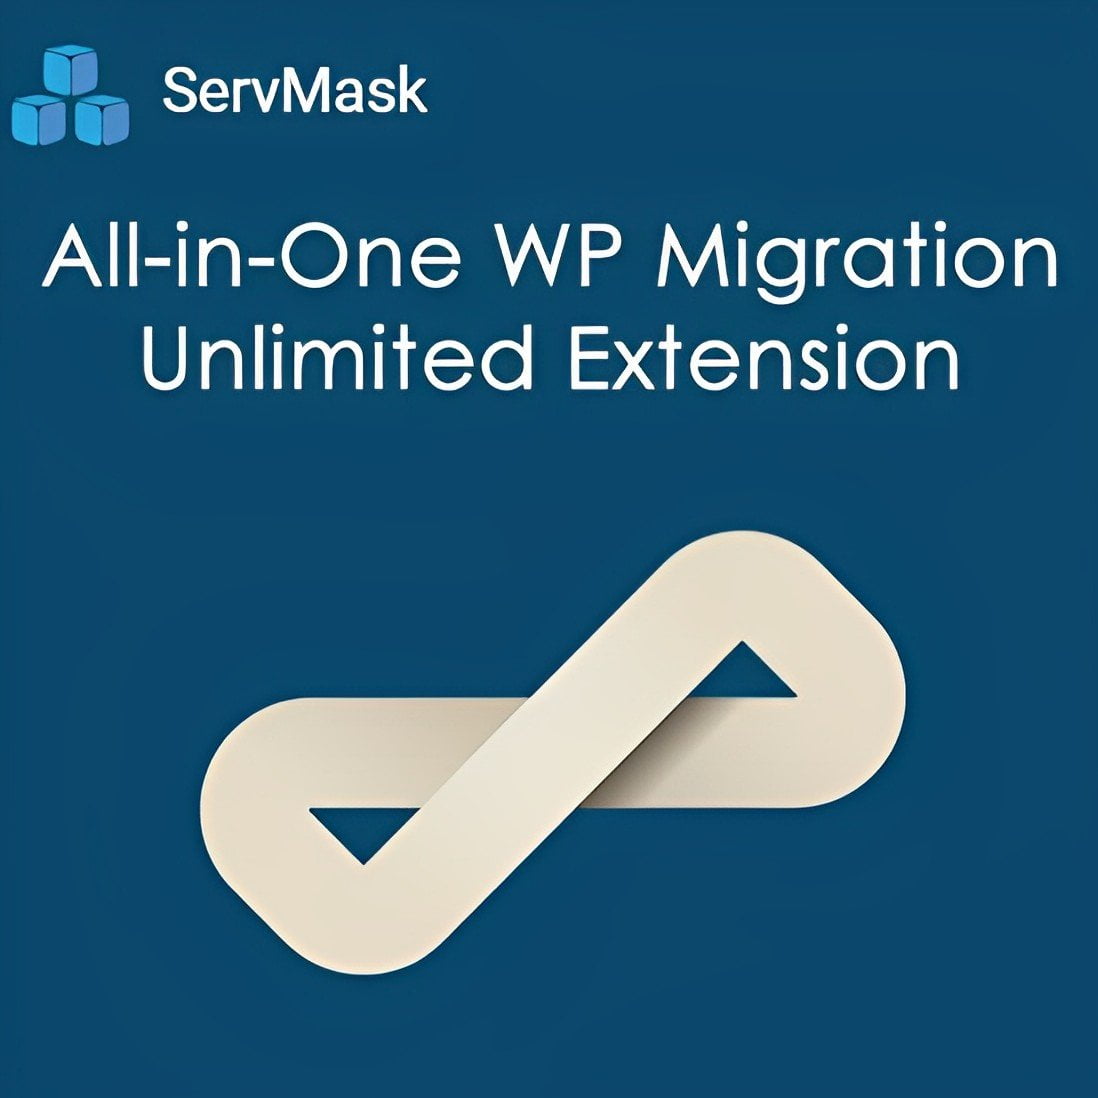 All in One WP Migration